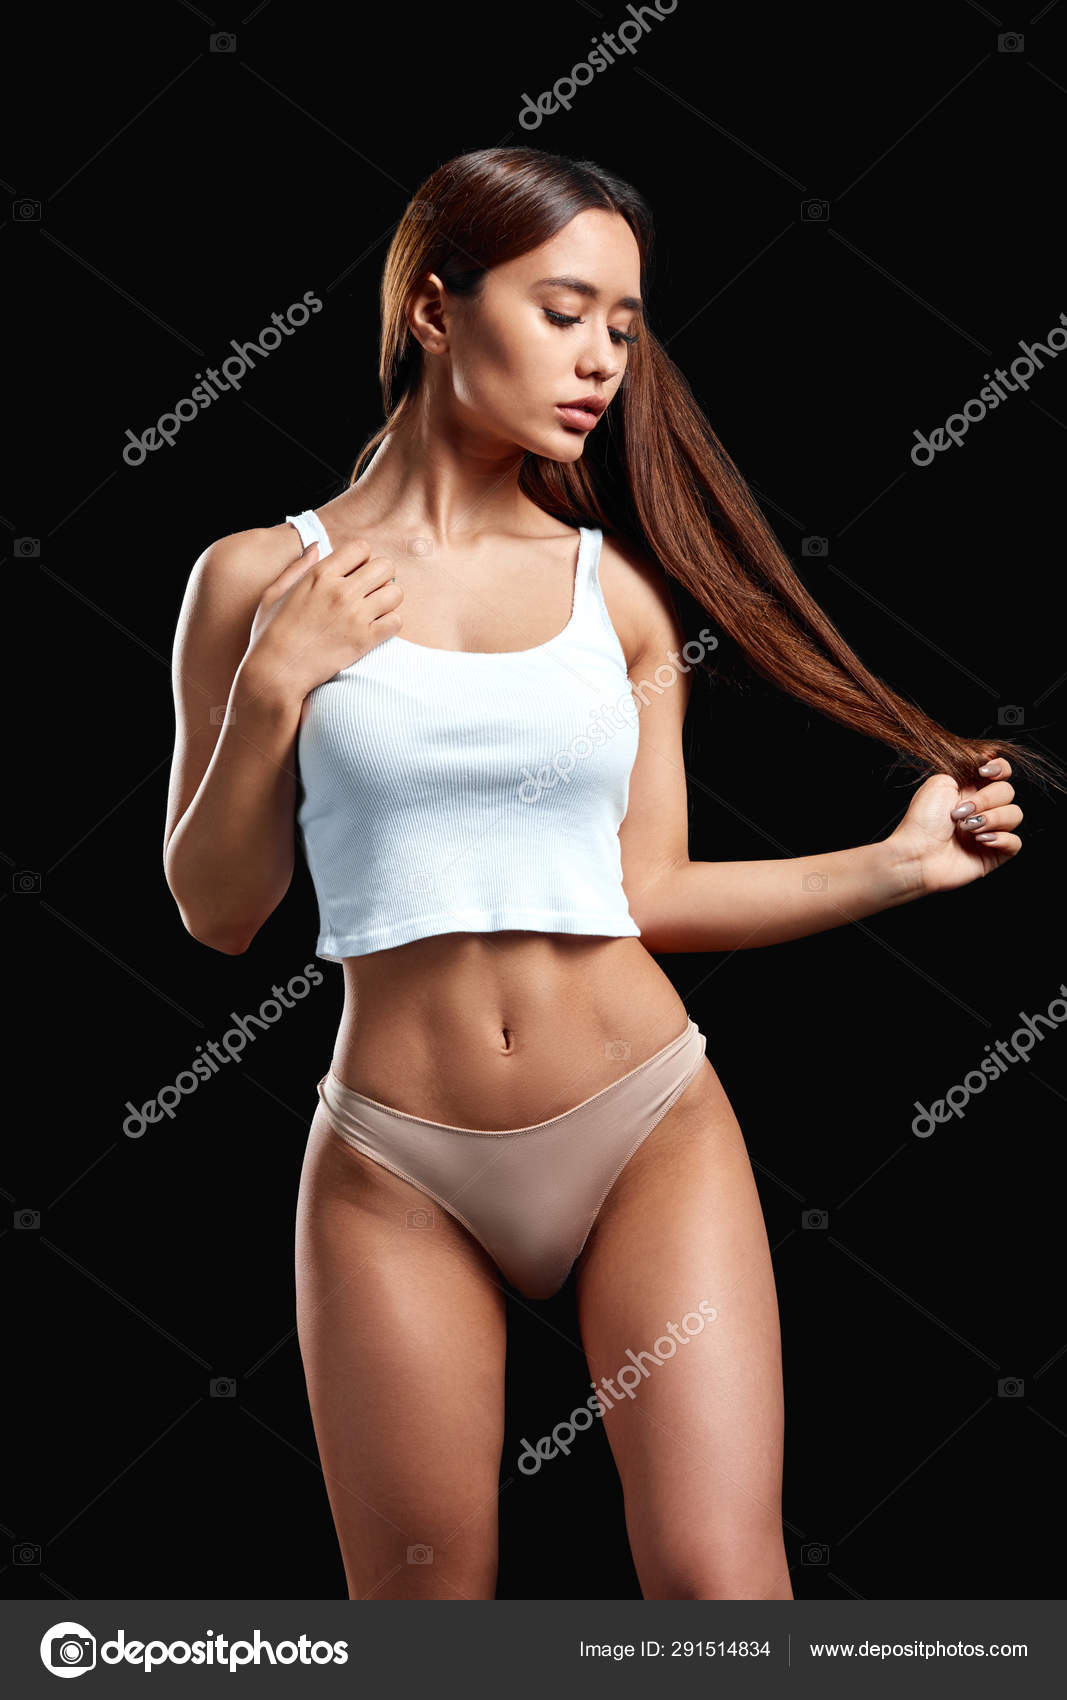 Slim well-built girl in stylish underwear looking down, touching